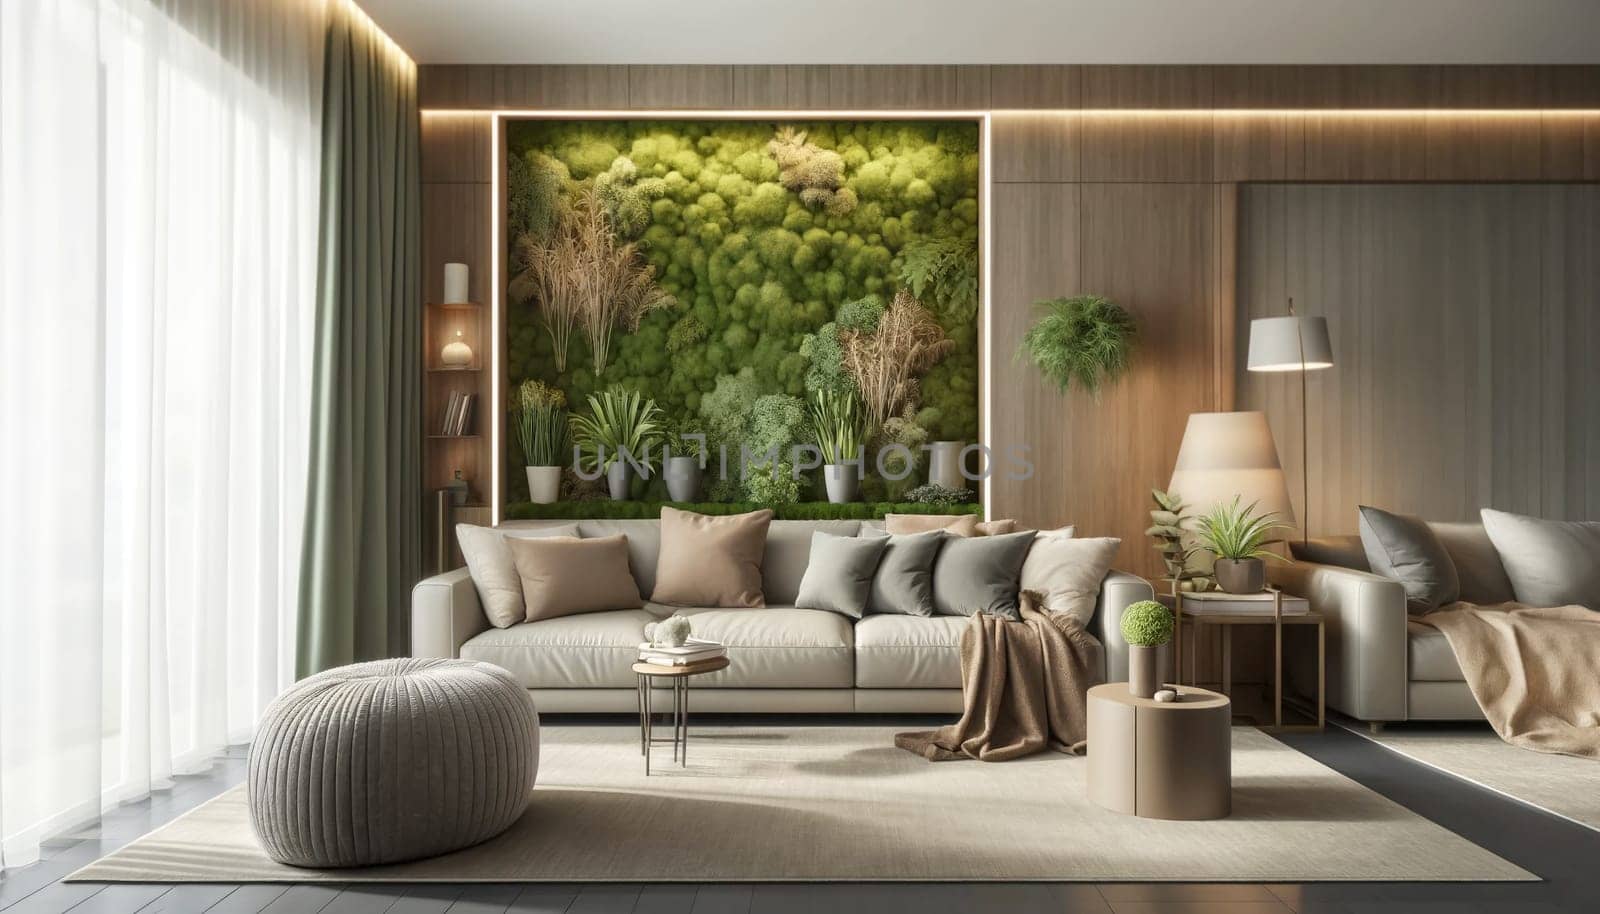 Decorative preserved forest moss on the wall in the living room interior, environmental design concept by Annado